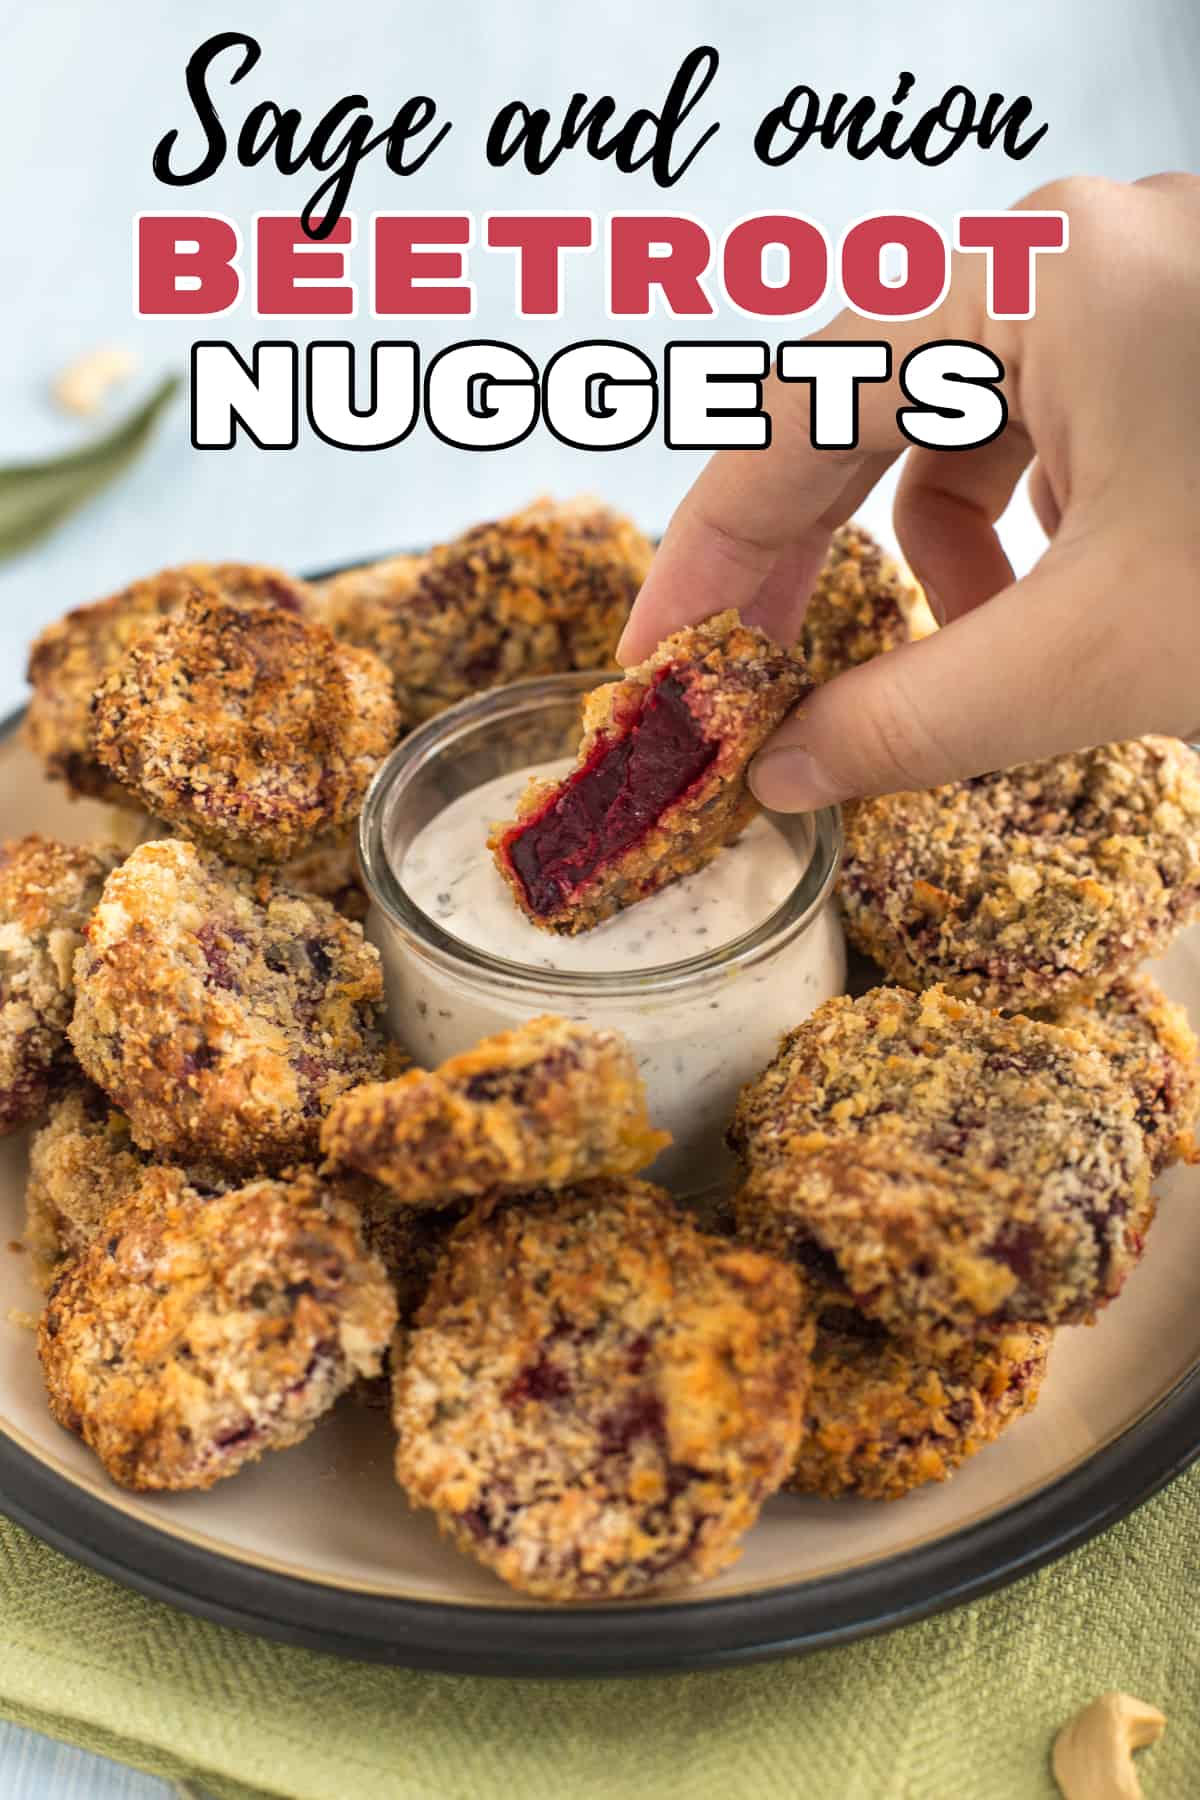 Sage-and-onion-beetroot-nuggets-11-copy.jpg